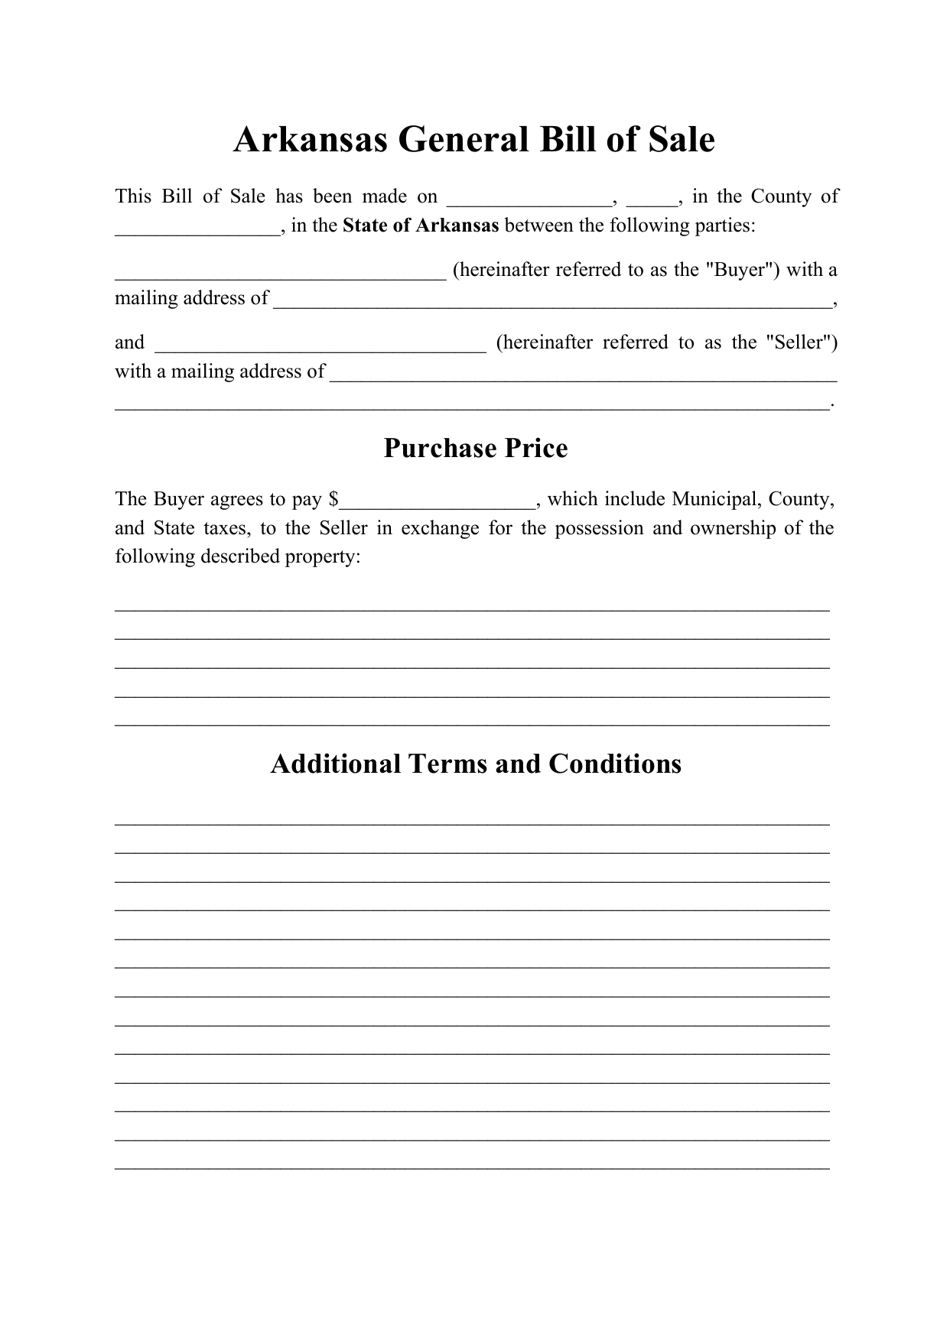 Generic Bill of Sale Form - Arkansas, Page 1